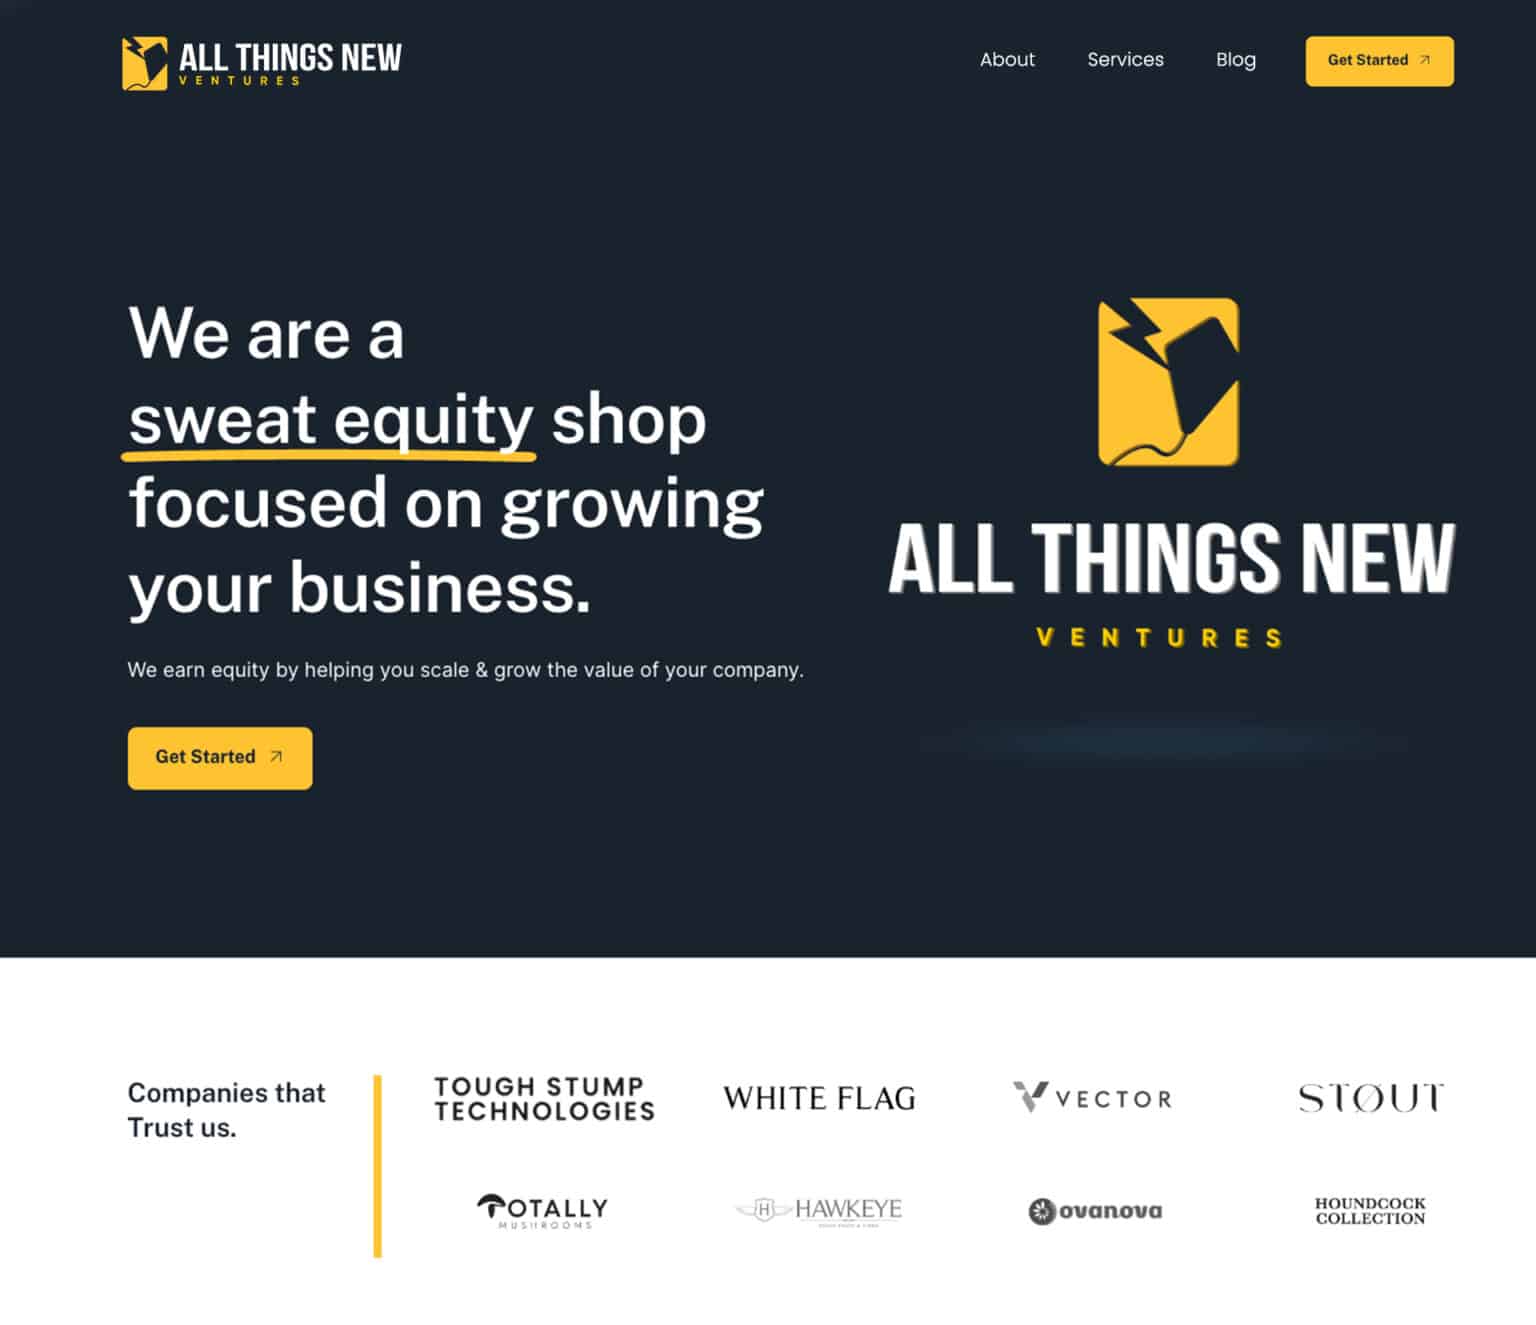 All things New Ventures header section of the website.